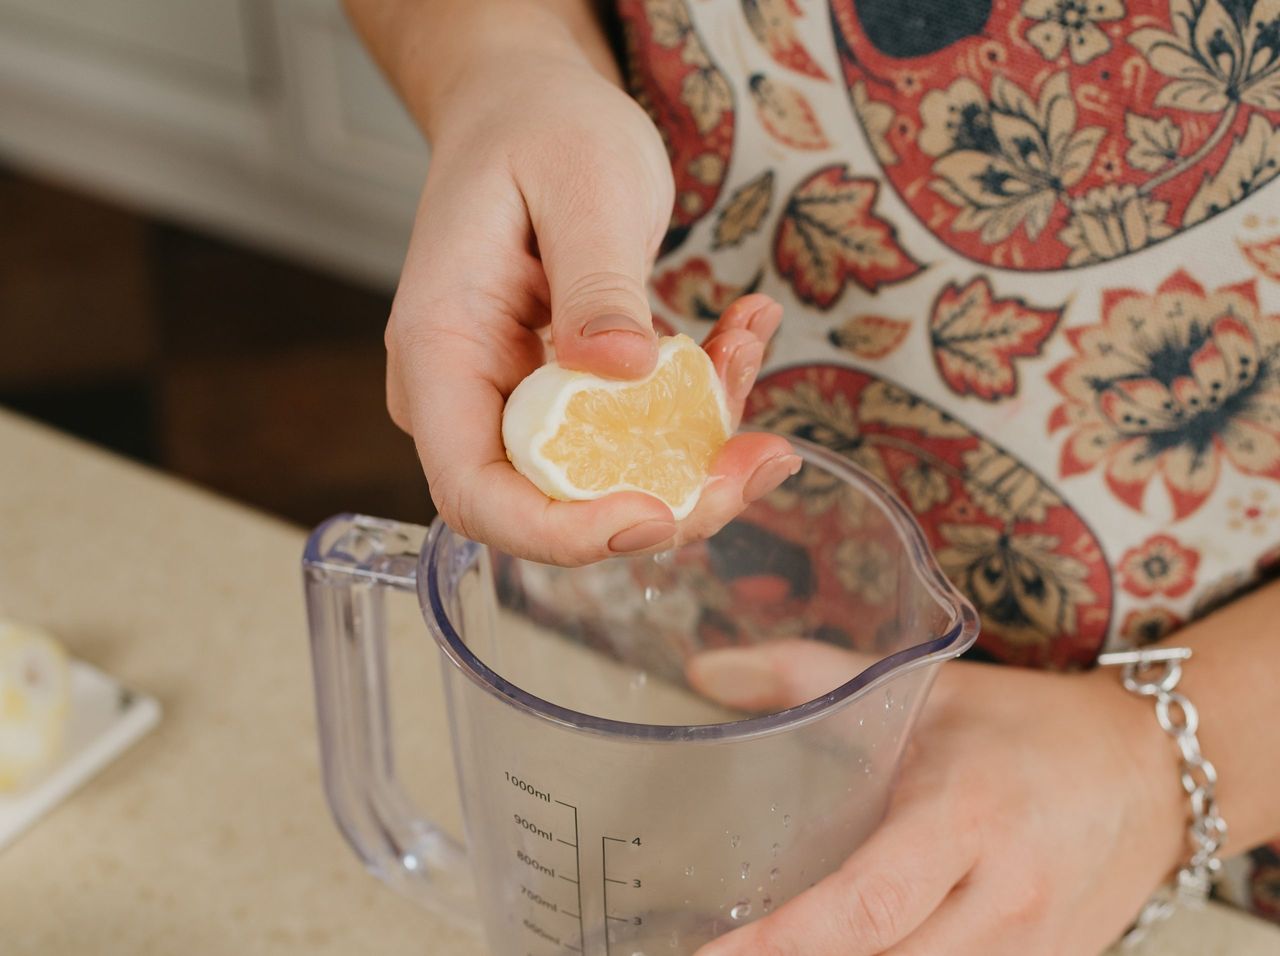 The hands of woman who is crushing lemon juice by the hand into the blender cup